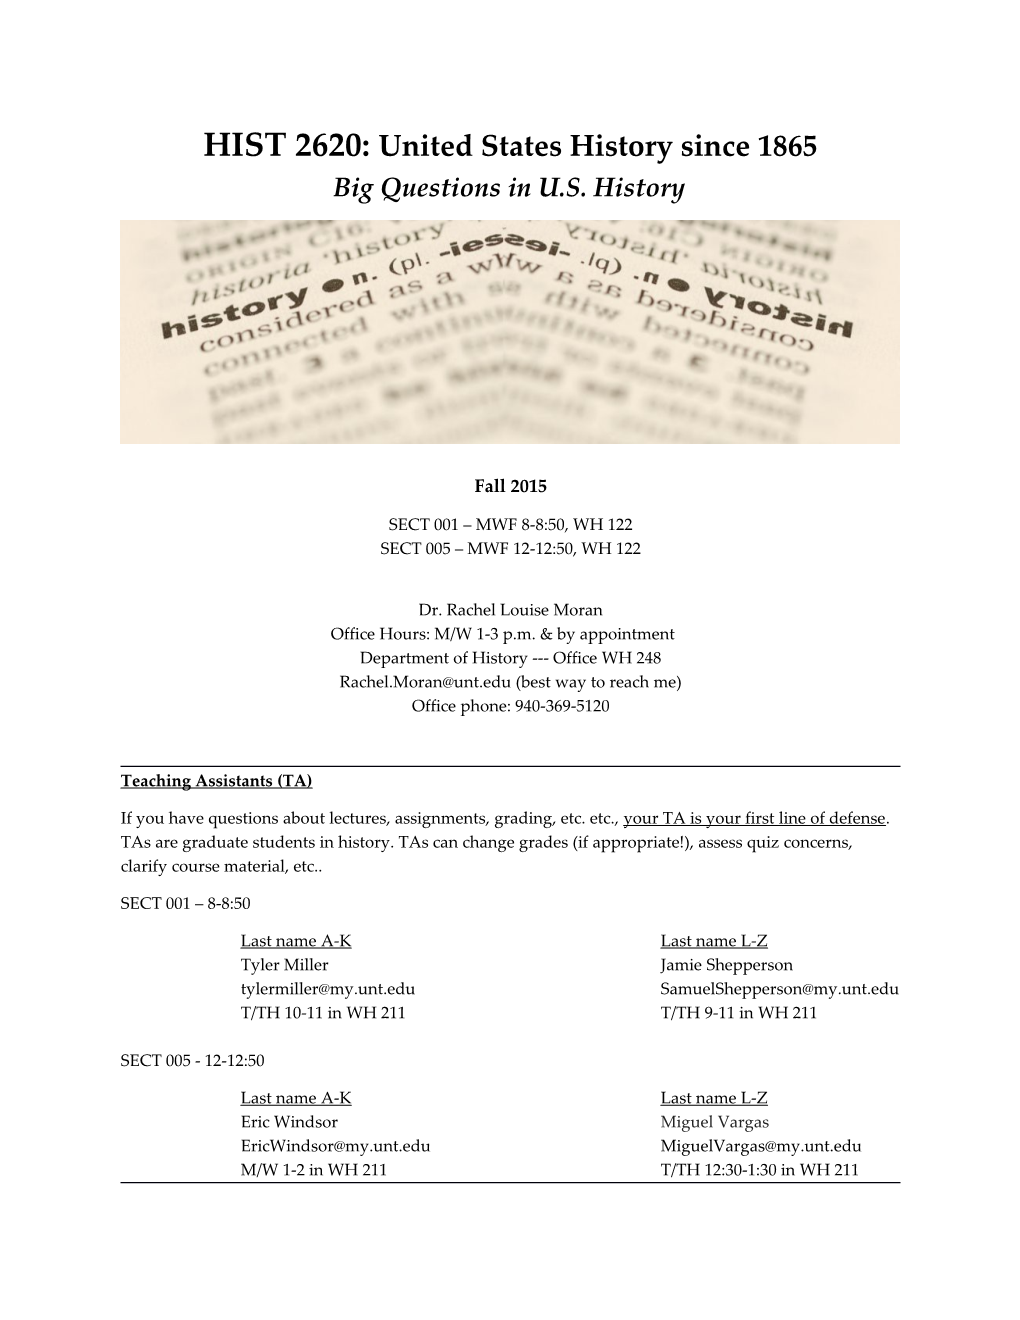 HIST 2620: United States History Since 1865 Big Questions in U.S. History